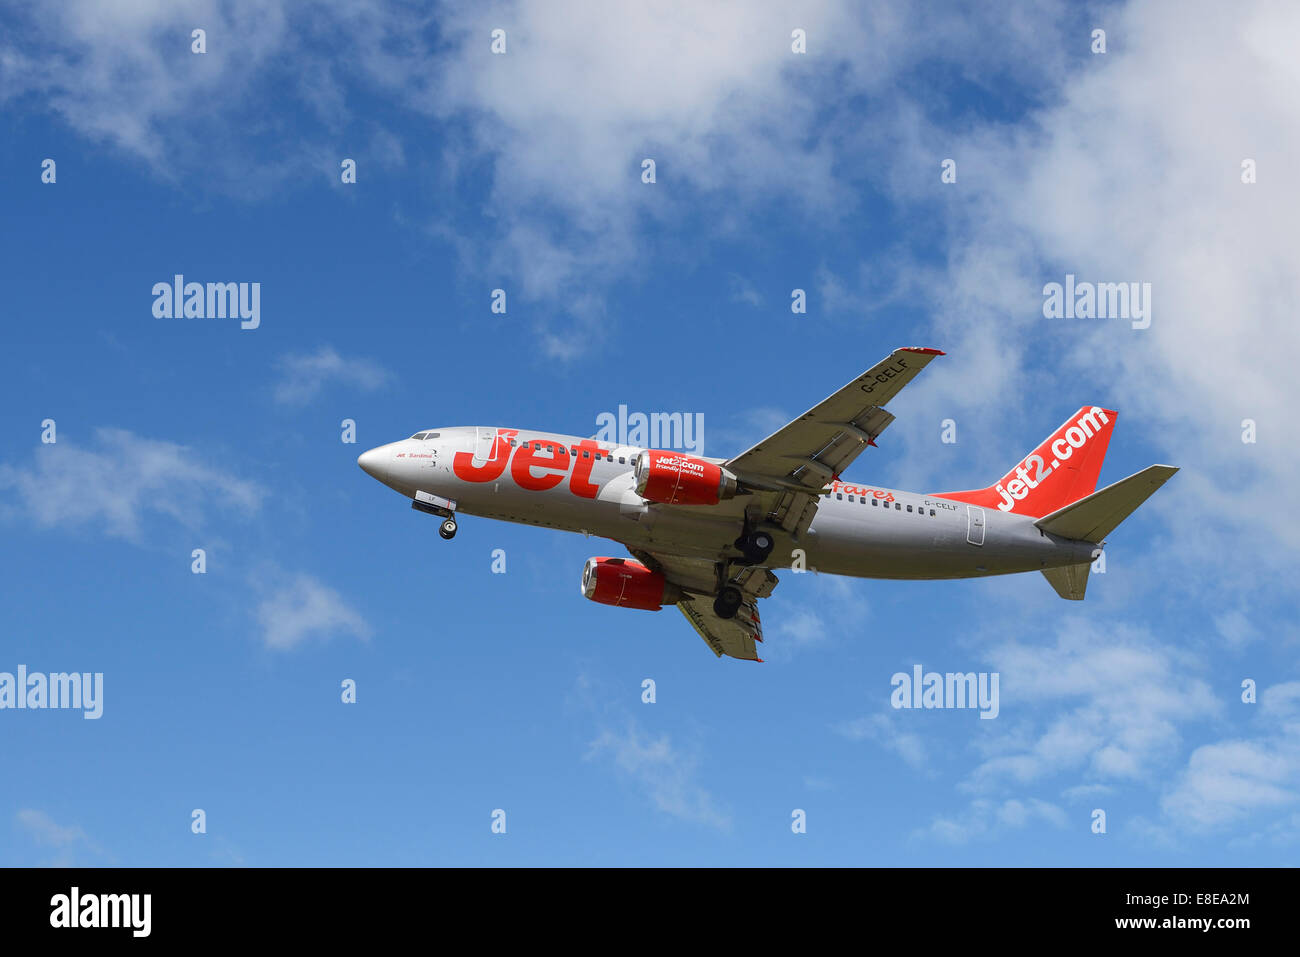 Jet2.com Boeing 737 aircraft on the final approach to Manchester Airport UK Stock Photo